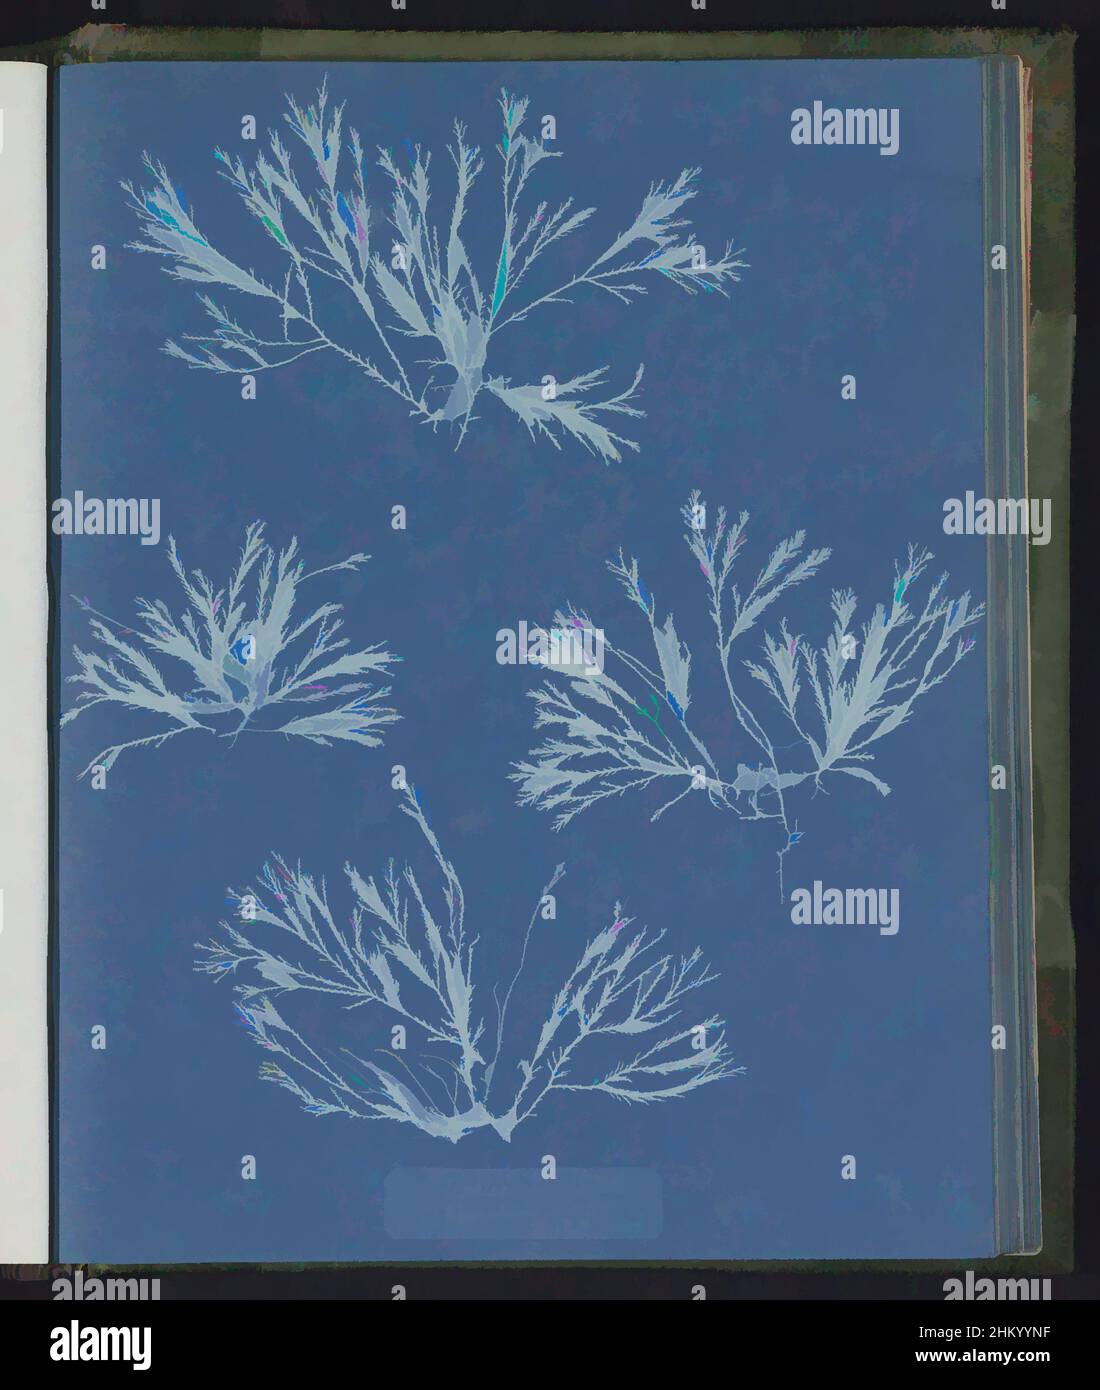 Art inspired by Rhytiphlea complanata, (Polysiphonia cristata), Anna Atkins, United Kingdom, c. 1843 - c. 1853, photographic support, cyanotype, height 250 mm × width 200 mm, Classic works modernized by Artotop with a splash of modernity. Shapes, color and value, eye-catching visual impact on art. Emotions through freedom of artworks in a contemporary way. A timeless message pursuing a wildly creative new direction. Artists turning to the digital medium and creating the Artotop NFT Stock Photo